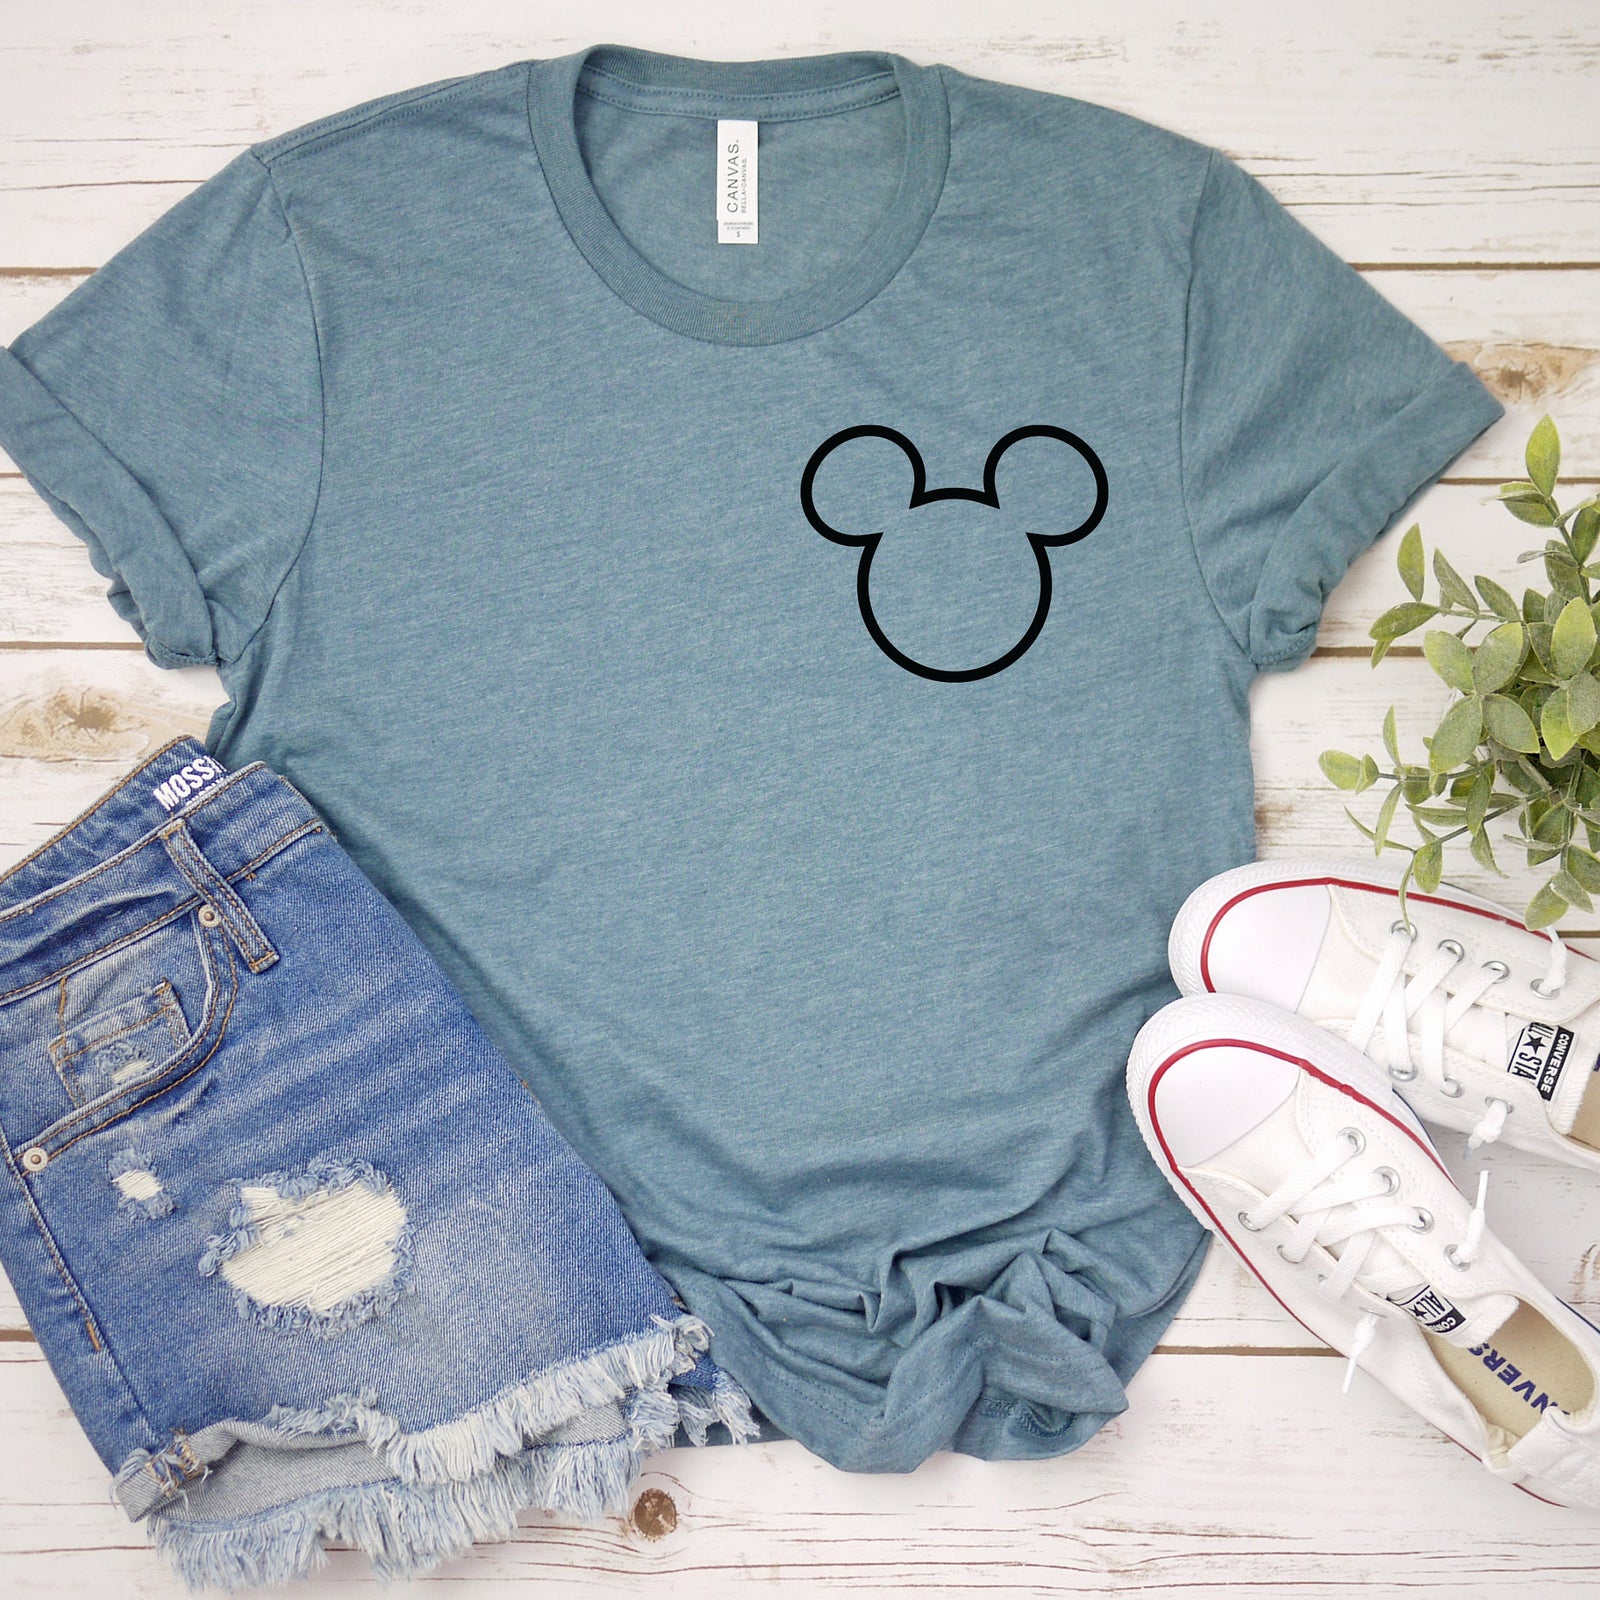 Pocket Size Mickey Outline Adult Unisex T shirt - Disney Trip Matching Shirts - Mickey Mouse T Shirt